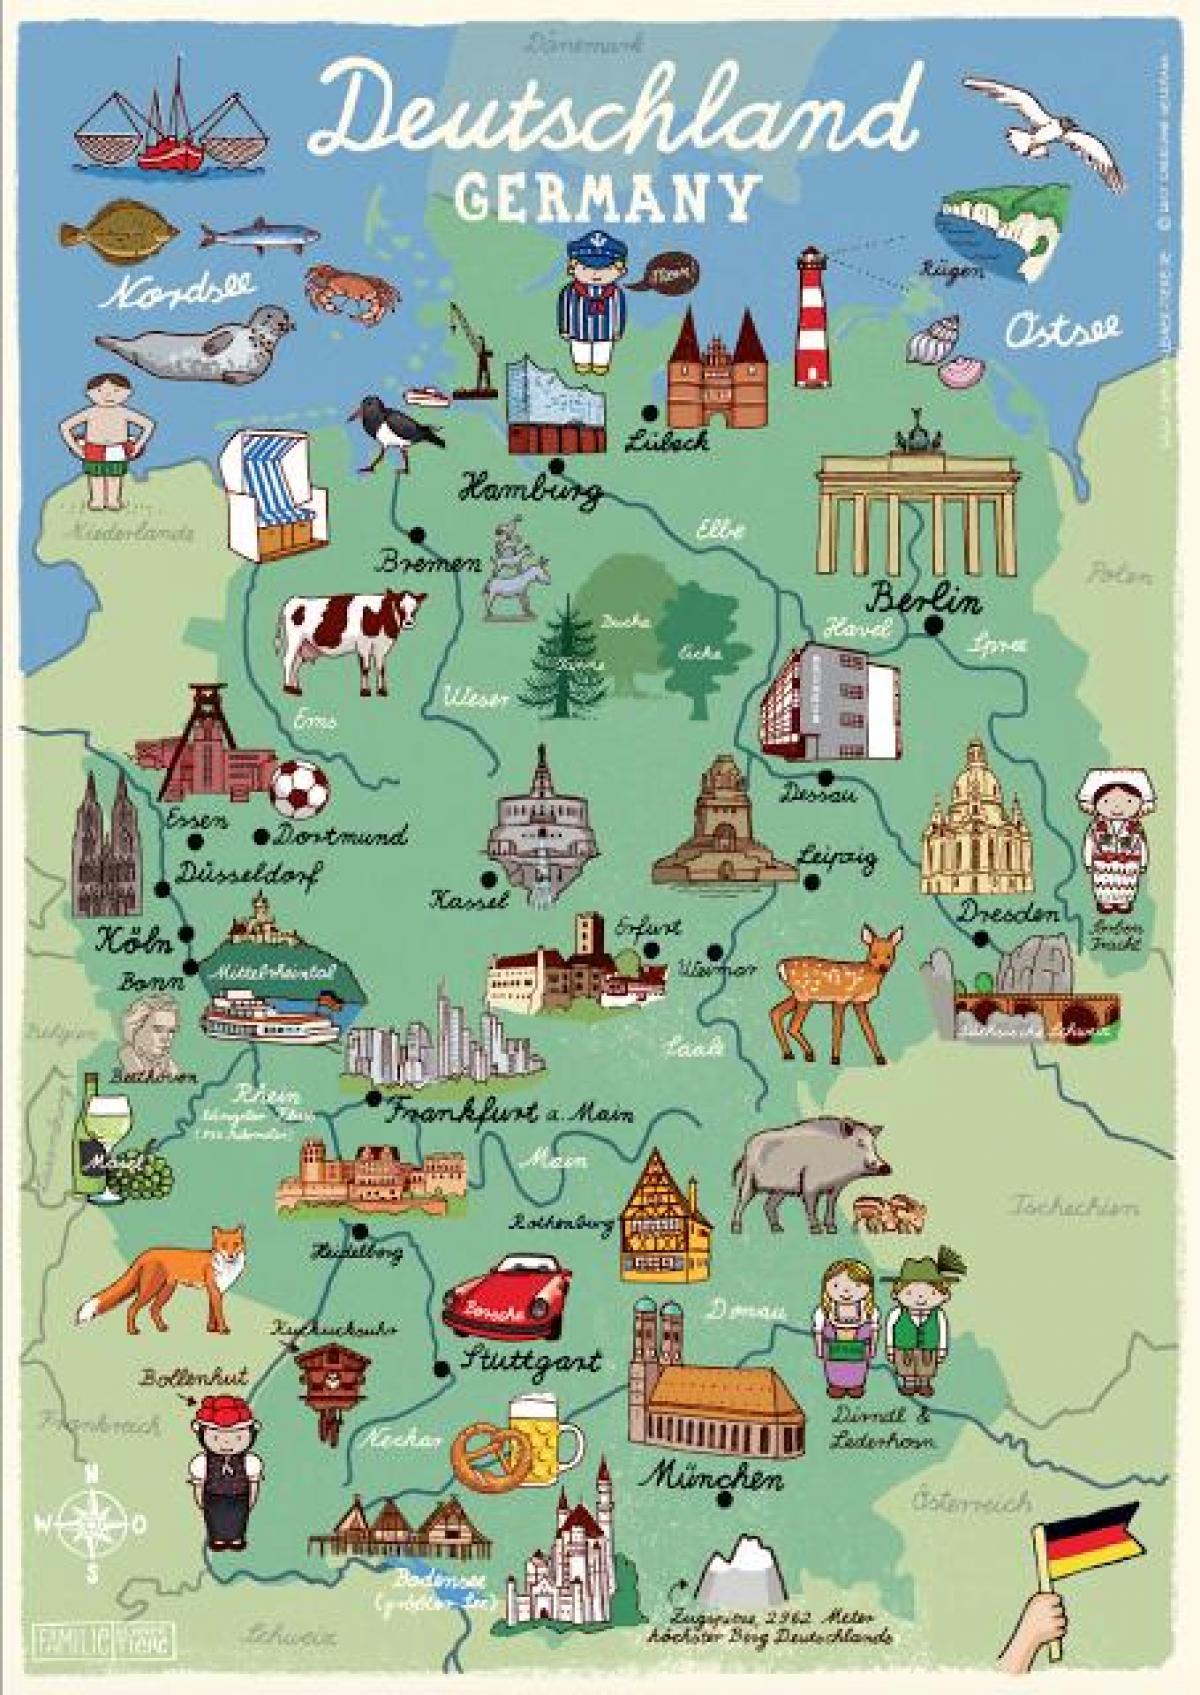 travel guide in germany